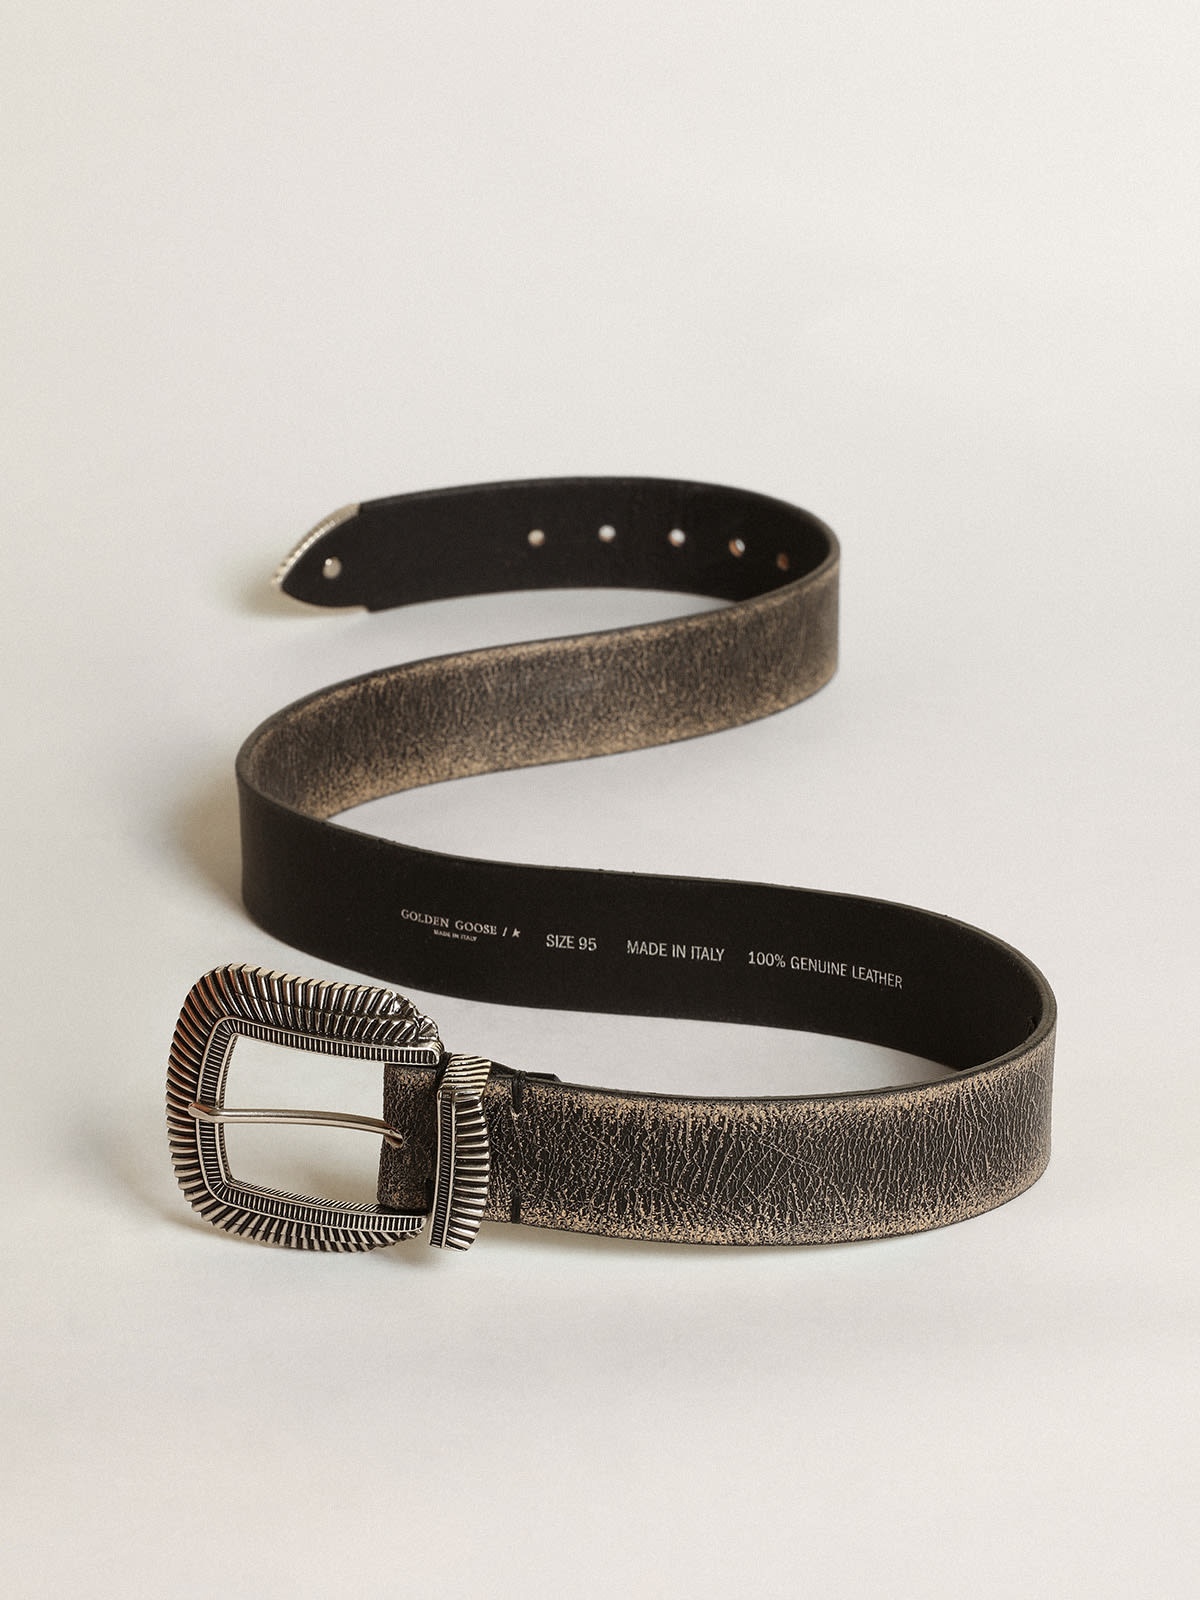 Men's belt in black leather with decorated buckle - 4